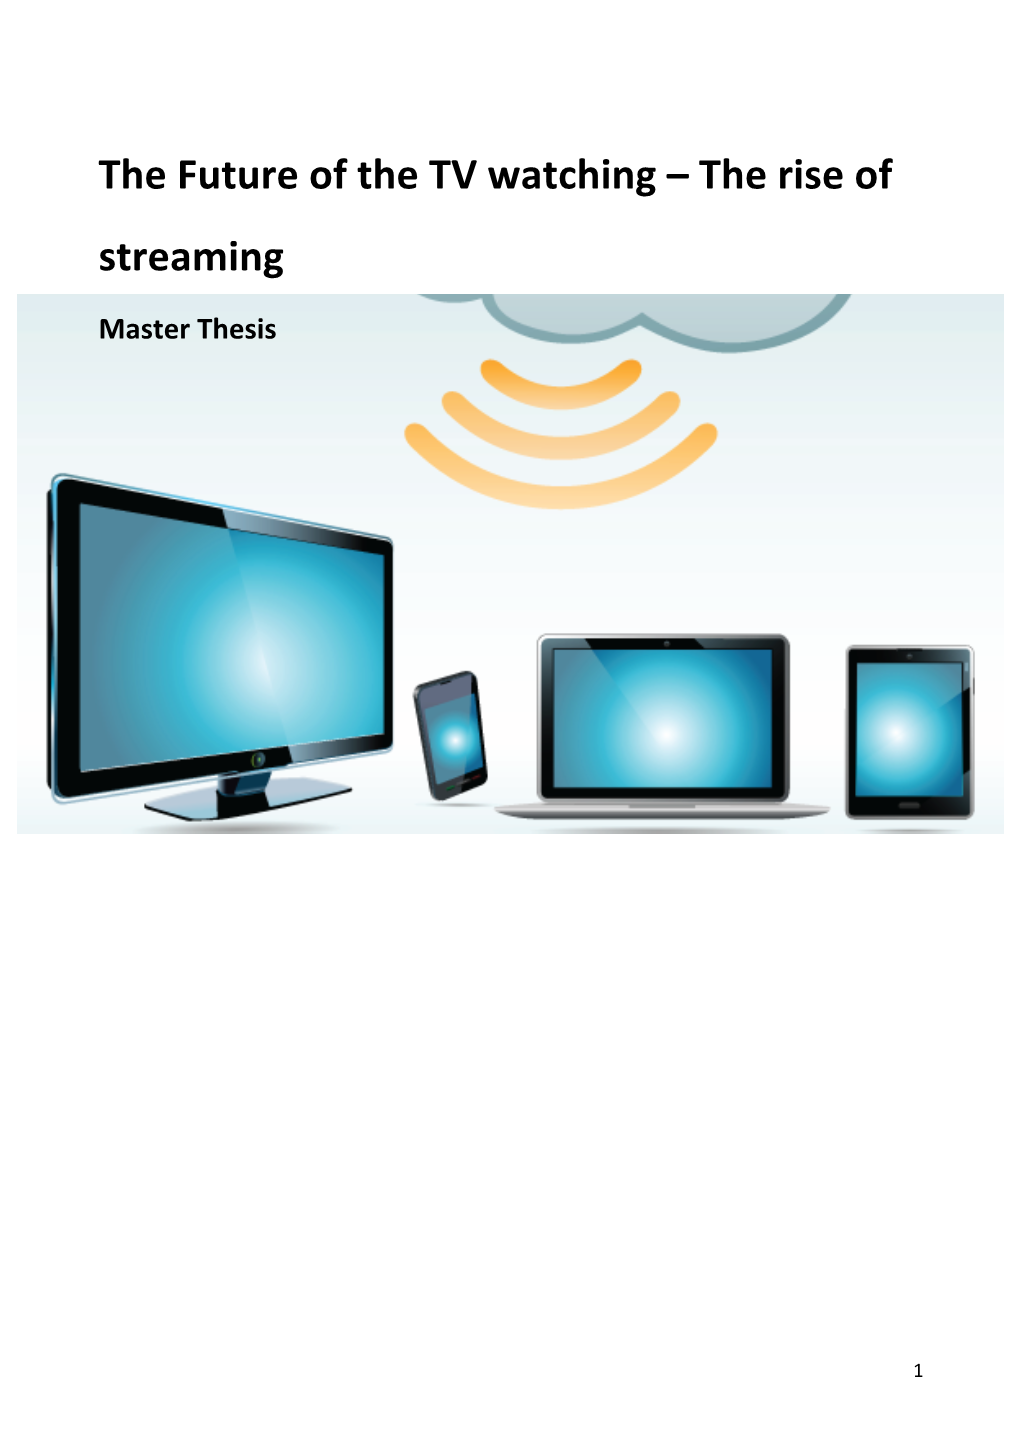 The Future of the TV Watching – the Rise of Streaming